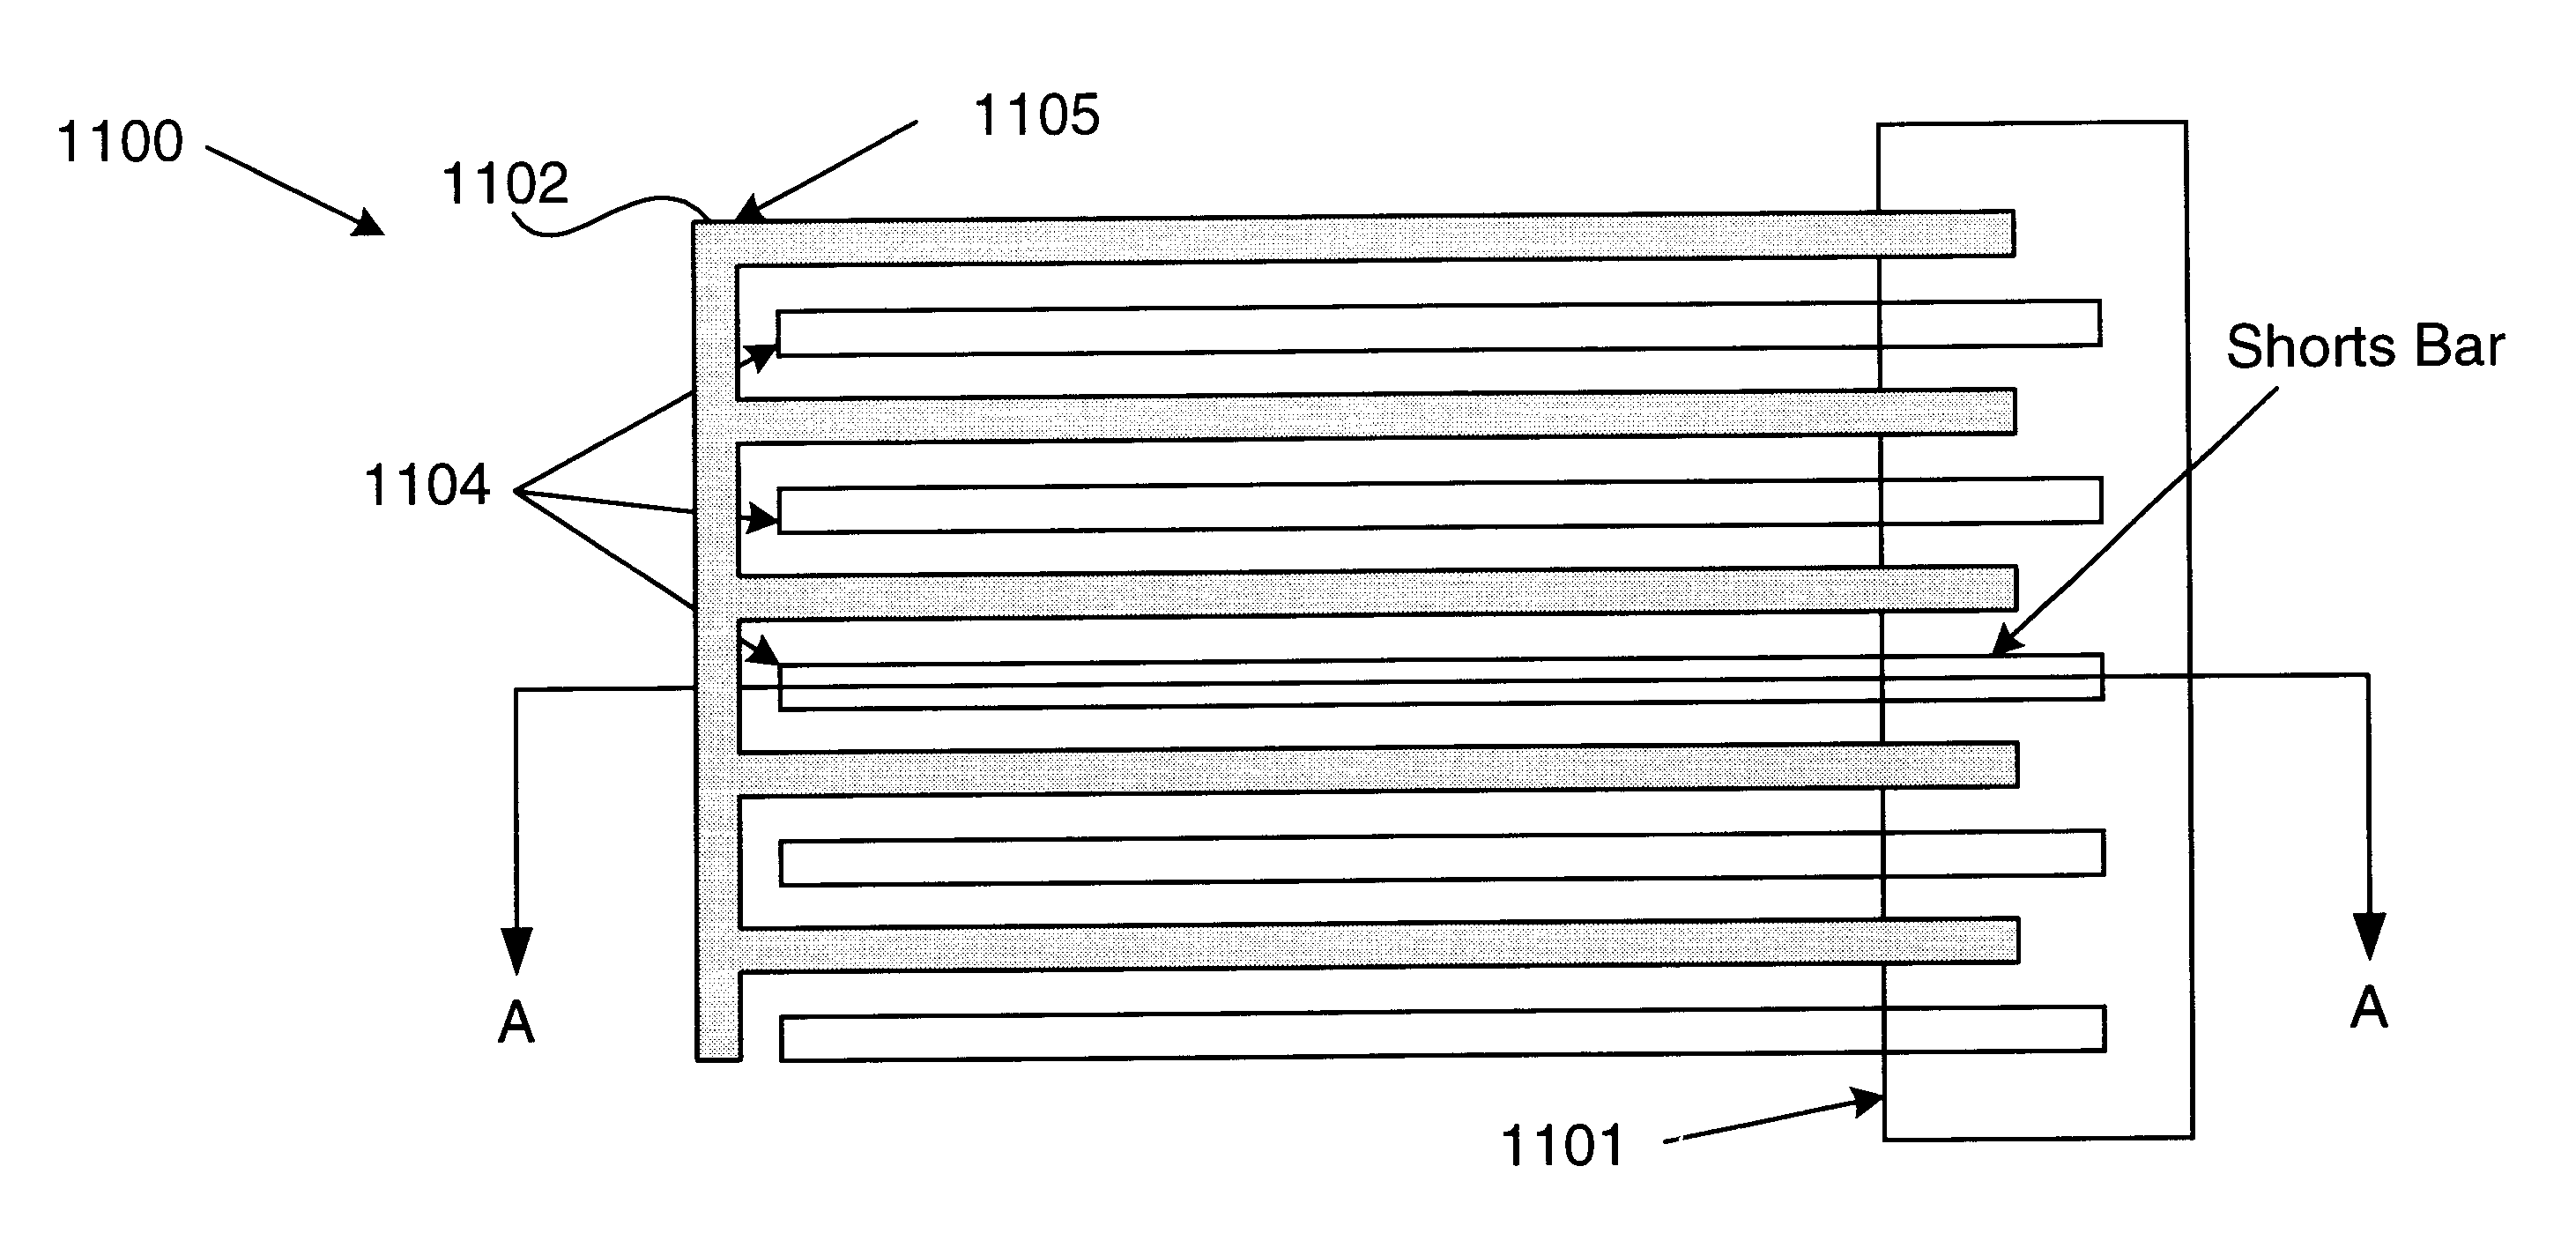 Dual probe test structures for semiconductor integrated circuits